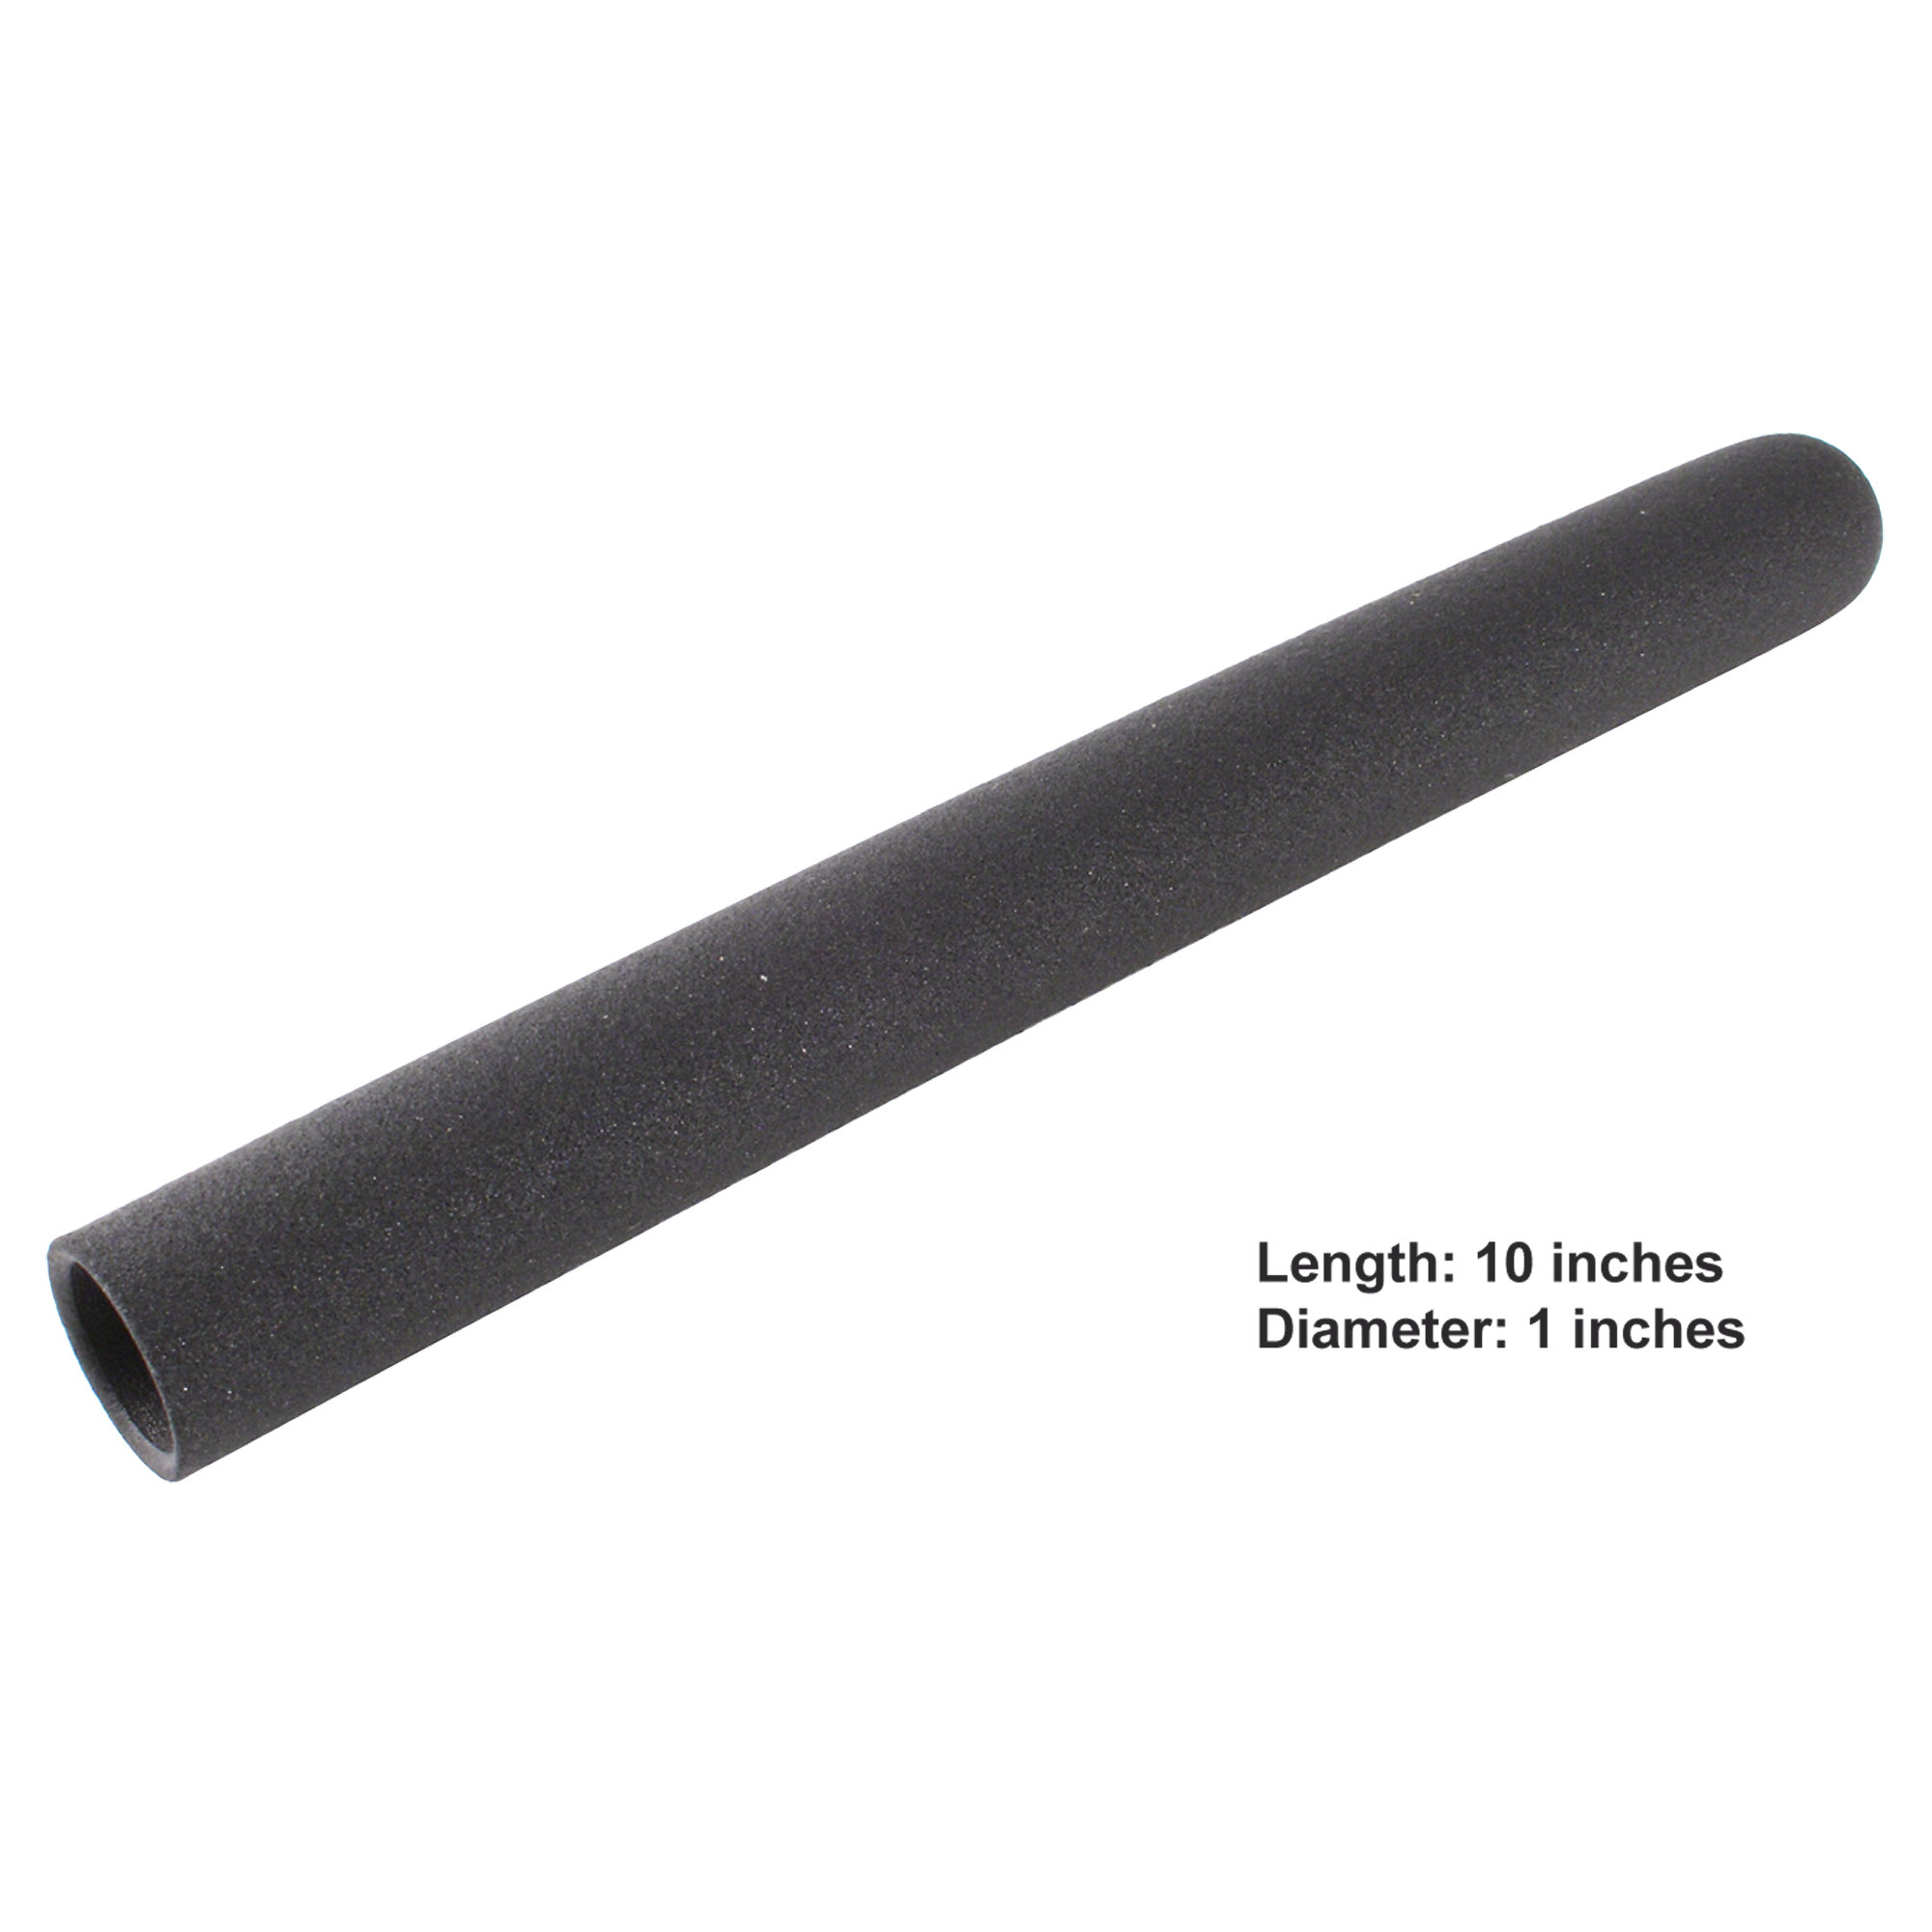 Closed End Rubber Grip, 10"Long, Fits 7/8", Each